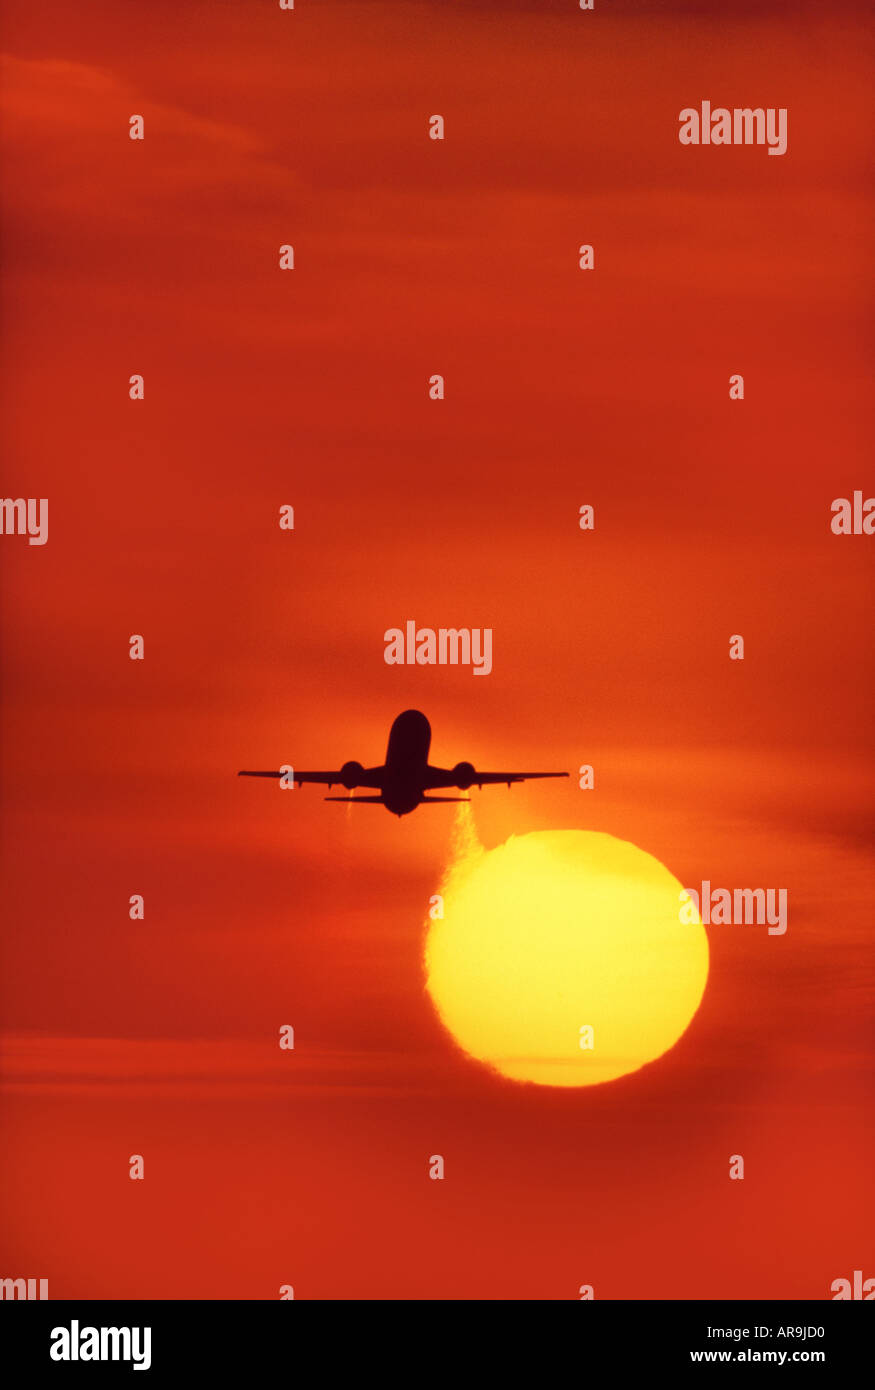 Boeing 737 jet in the air take off  heading into an golden orange sky at sunset sunrise dusk showing jet thrust exhaust Stock Photo